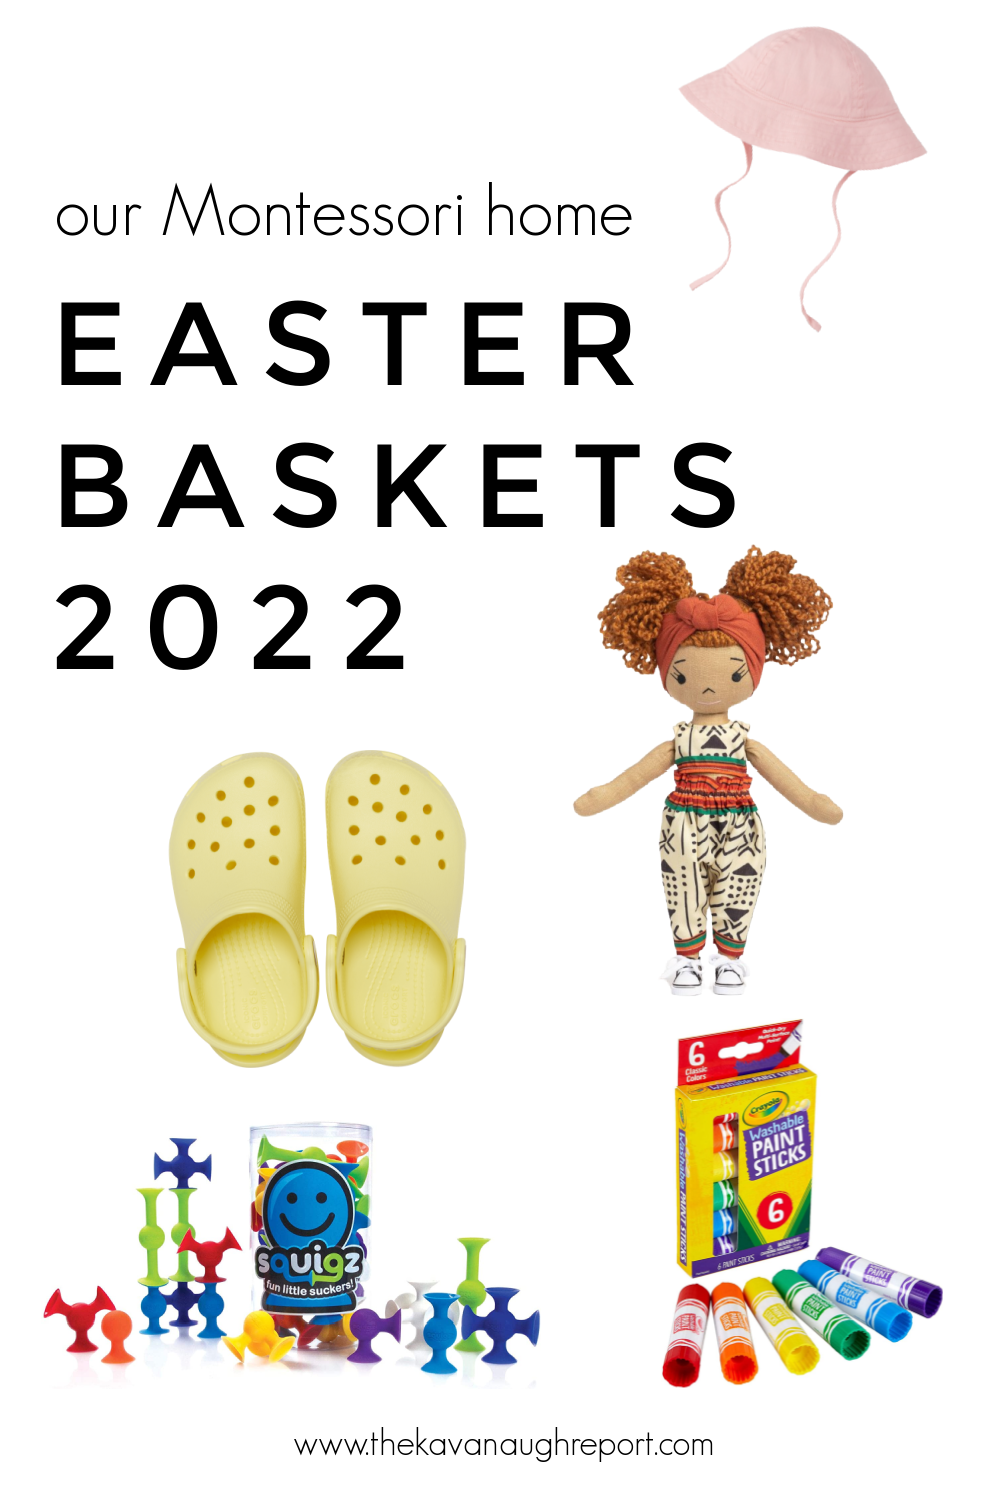 A look at our Montessori friendly Easter baskets for a babies, toddlers, preschool, and elementary.